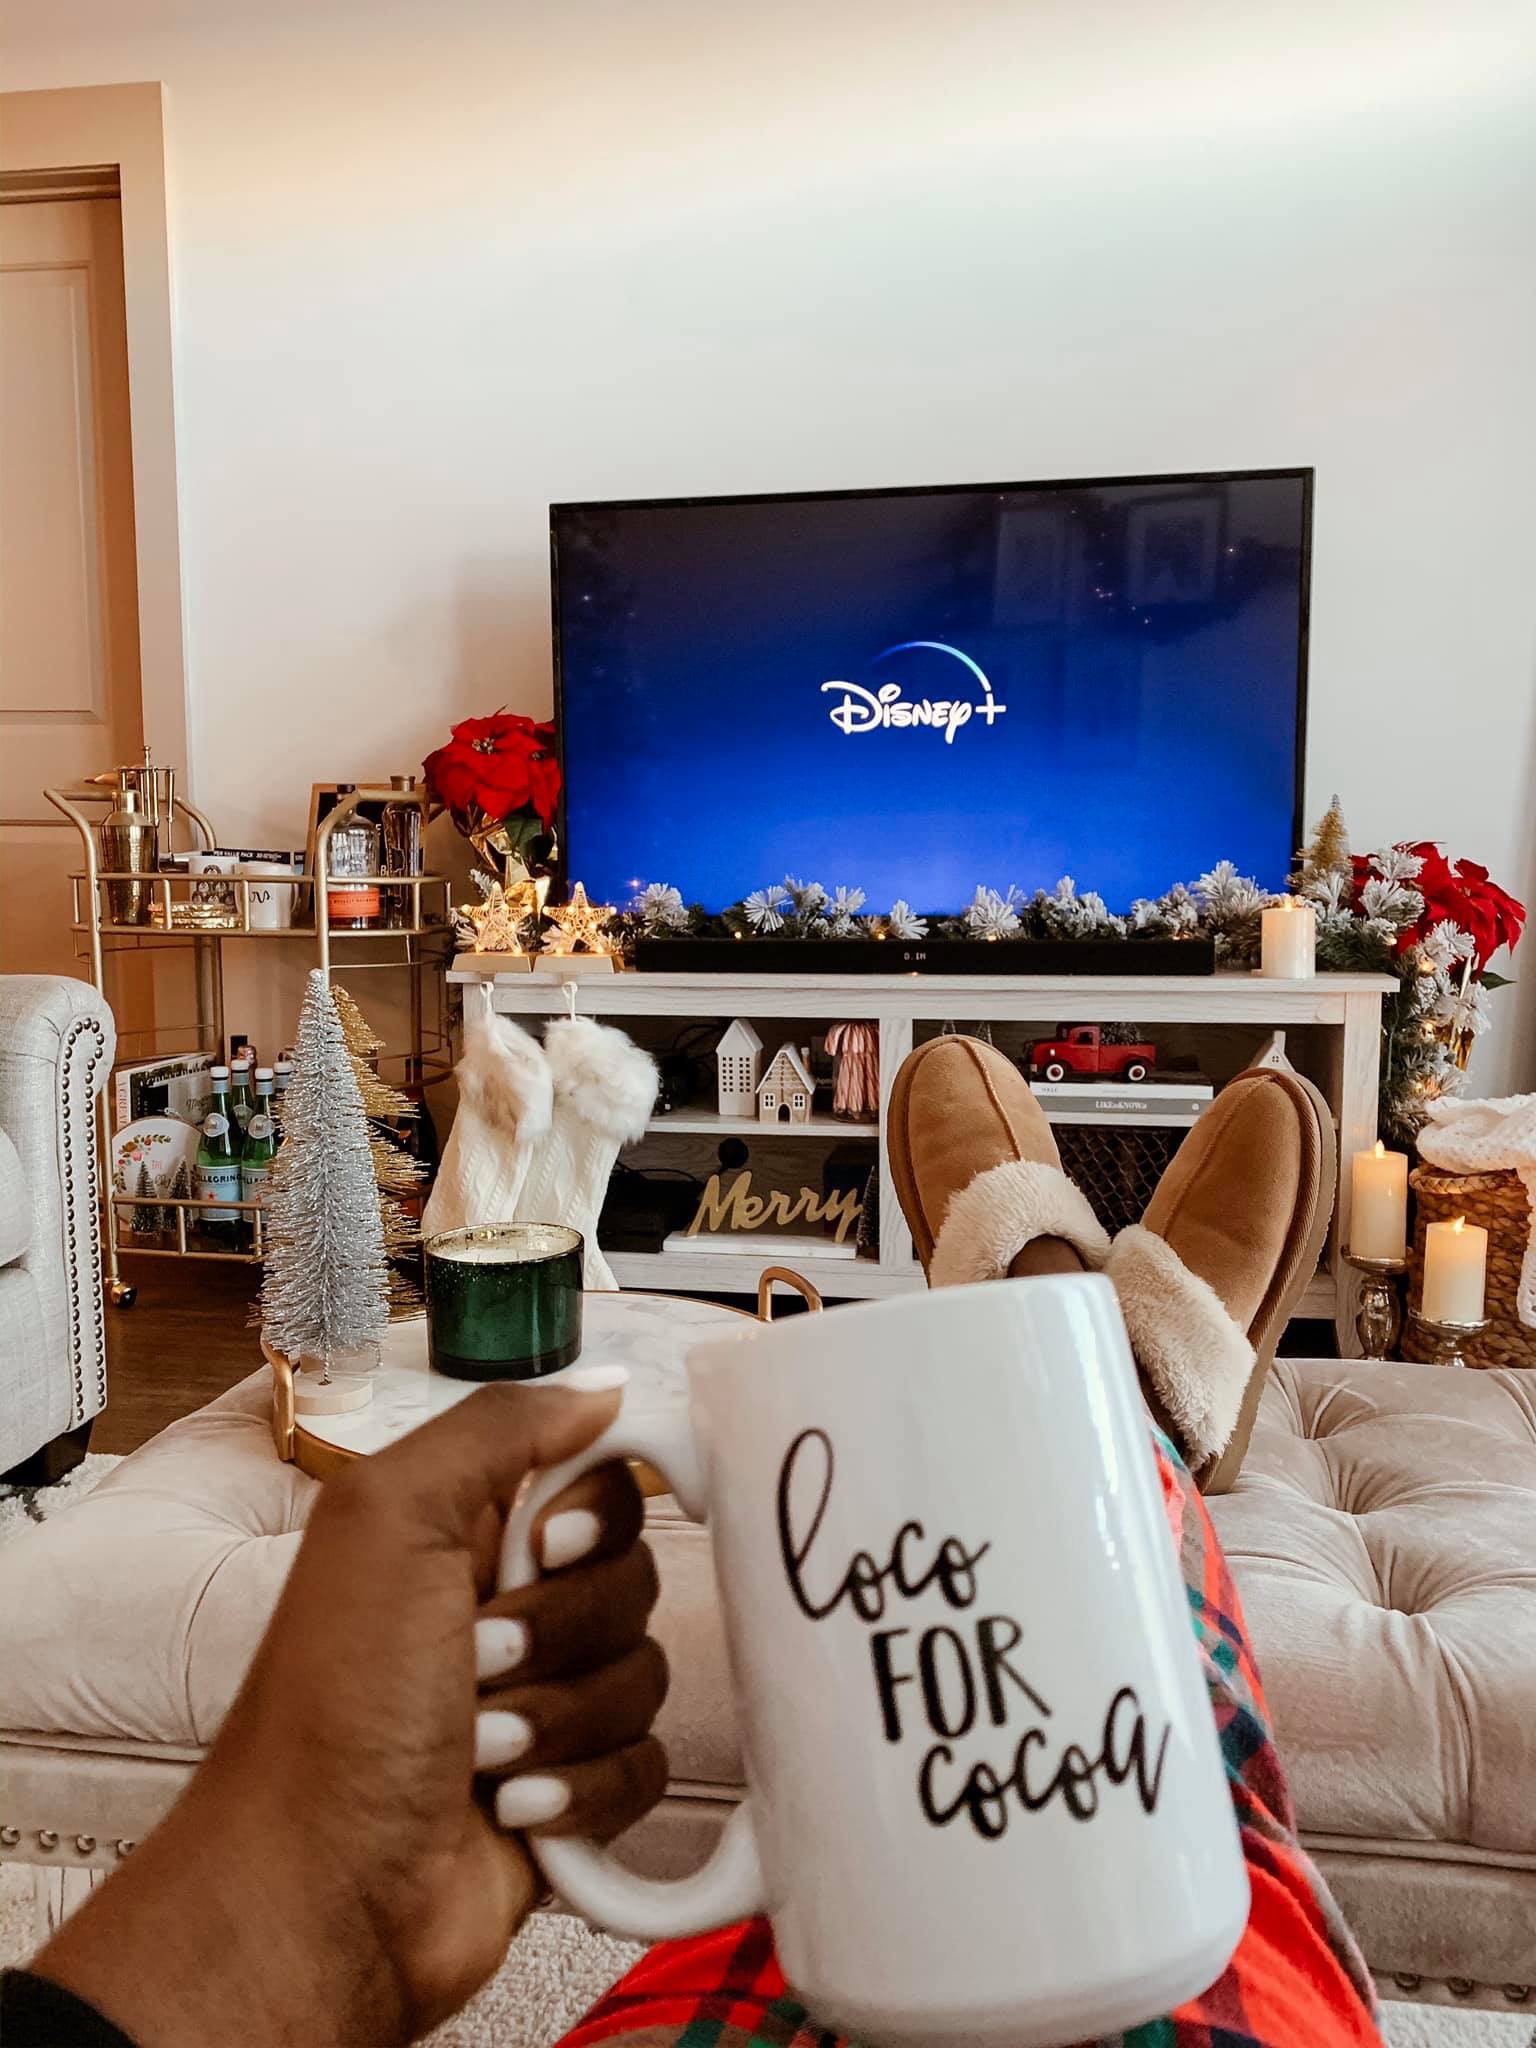 How to decorate your tv console for Christmas | Affordable holiday decor ideas on the blog | Goodtomicha.com